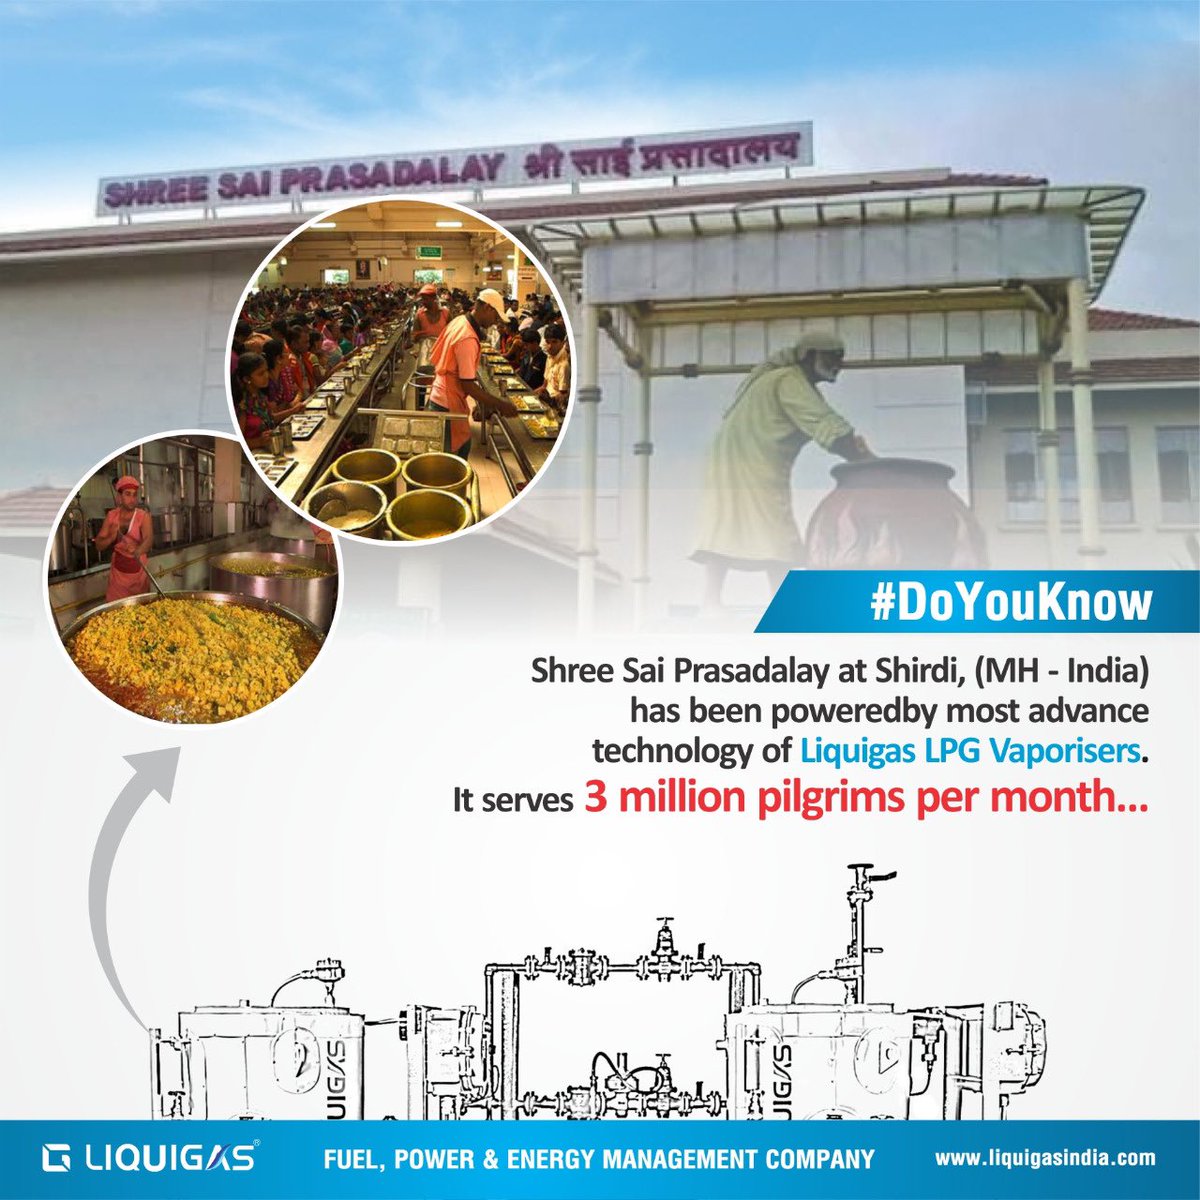 #DoYouKnow

Shree Sai Prasadalay at Shirdi, (MH - India) has been powered by most advance technology of Liquigas LPG Vaporisers.

It serves 3 millions pilgrims per month. 
 
Liquigas - Fuel, Power & Energy Management Company. 

#LPG #MegaKitchen #SaiBaba #Liquigas #ThermalPower